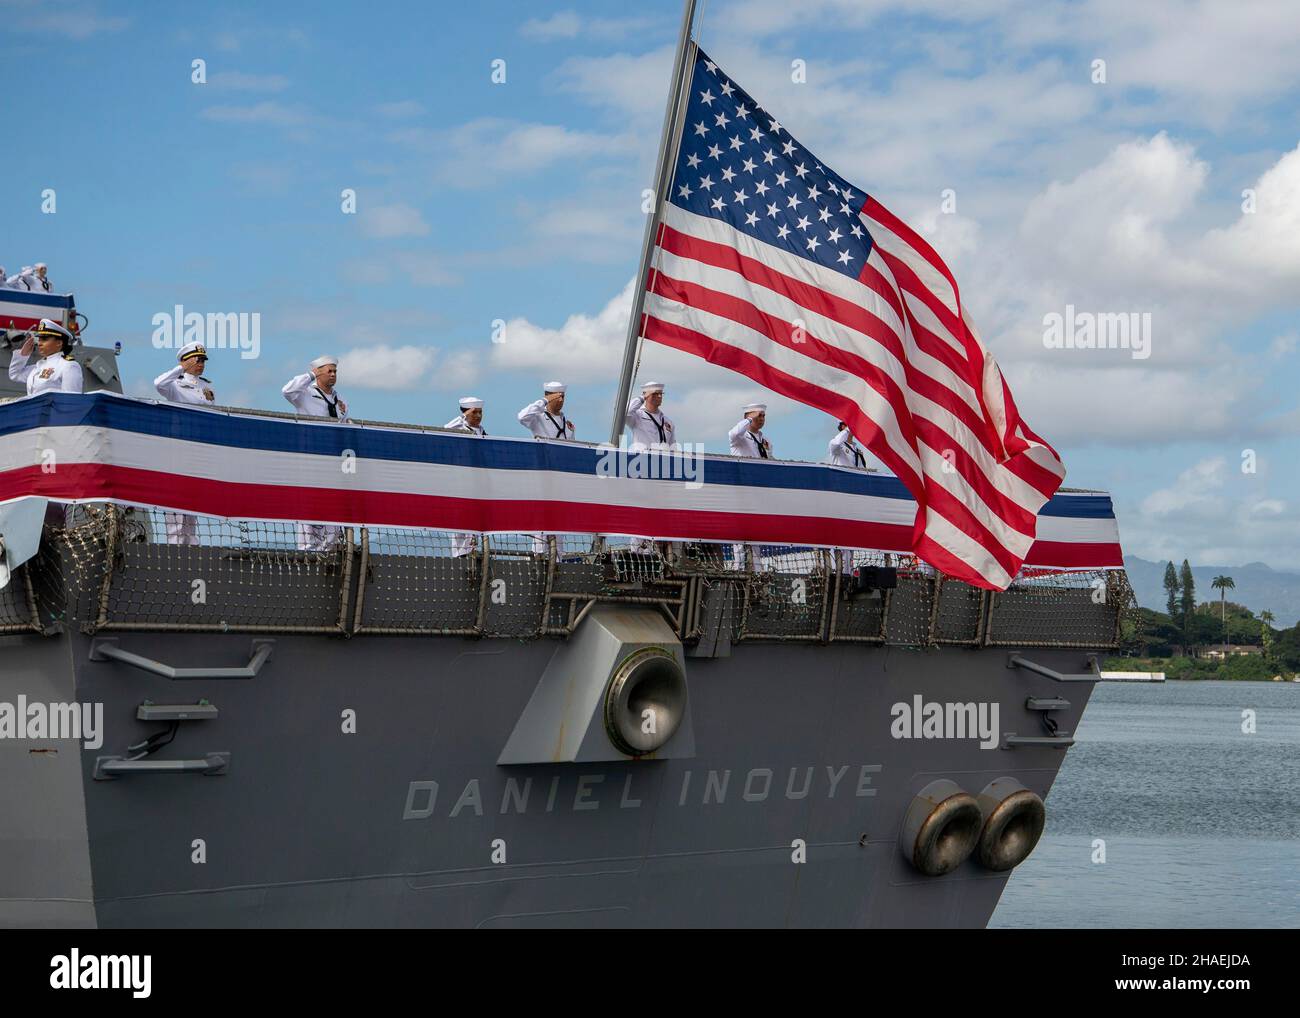 Pearl Harbor, United States. 08 December, 2021. U.S. Navy sailors man the rails during the commissioning ceremony for the newest guided-missile destroyer, USS Daniel Inouye at Joint Base Pearl Harbor-Hickam, December 8, 2021 in Honolulu, Hawaii. The warship honors former U.S. Senator and Medal of Honor recipient Daniel Inouye. Credit: MC2 Nick Bauer/U.S. Navy/Alamy Live News Stock Photo